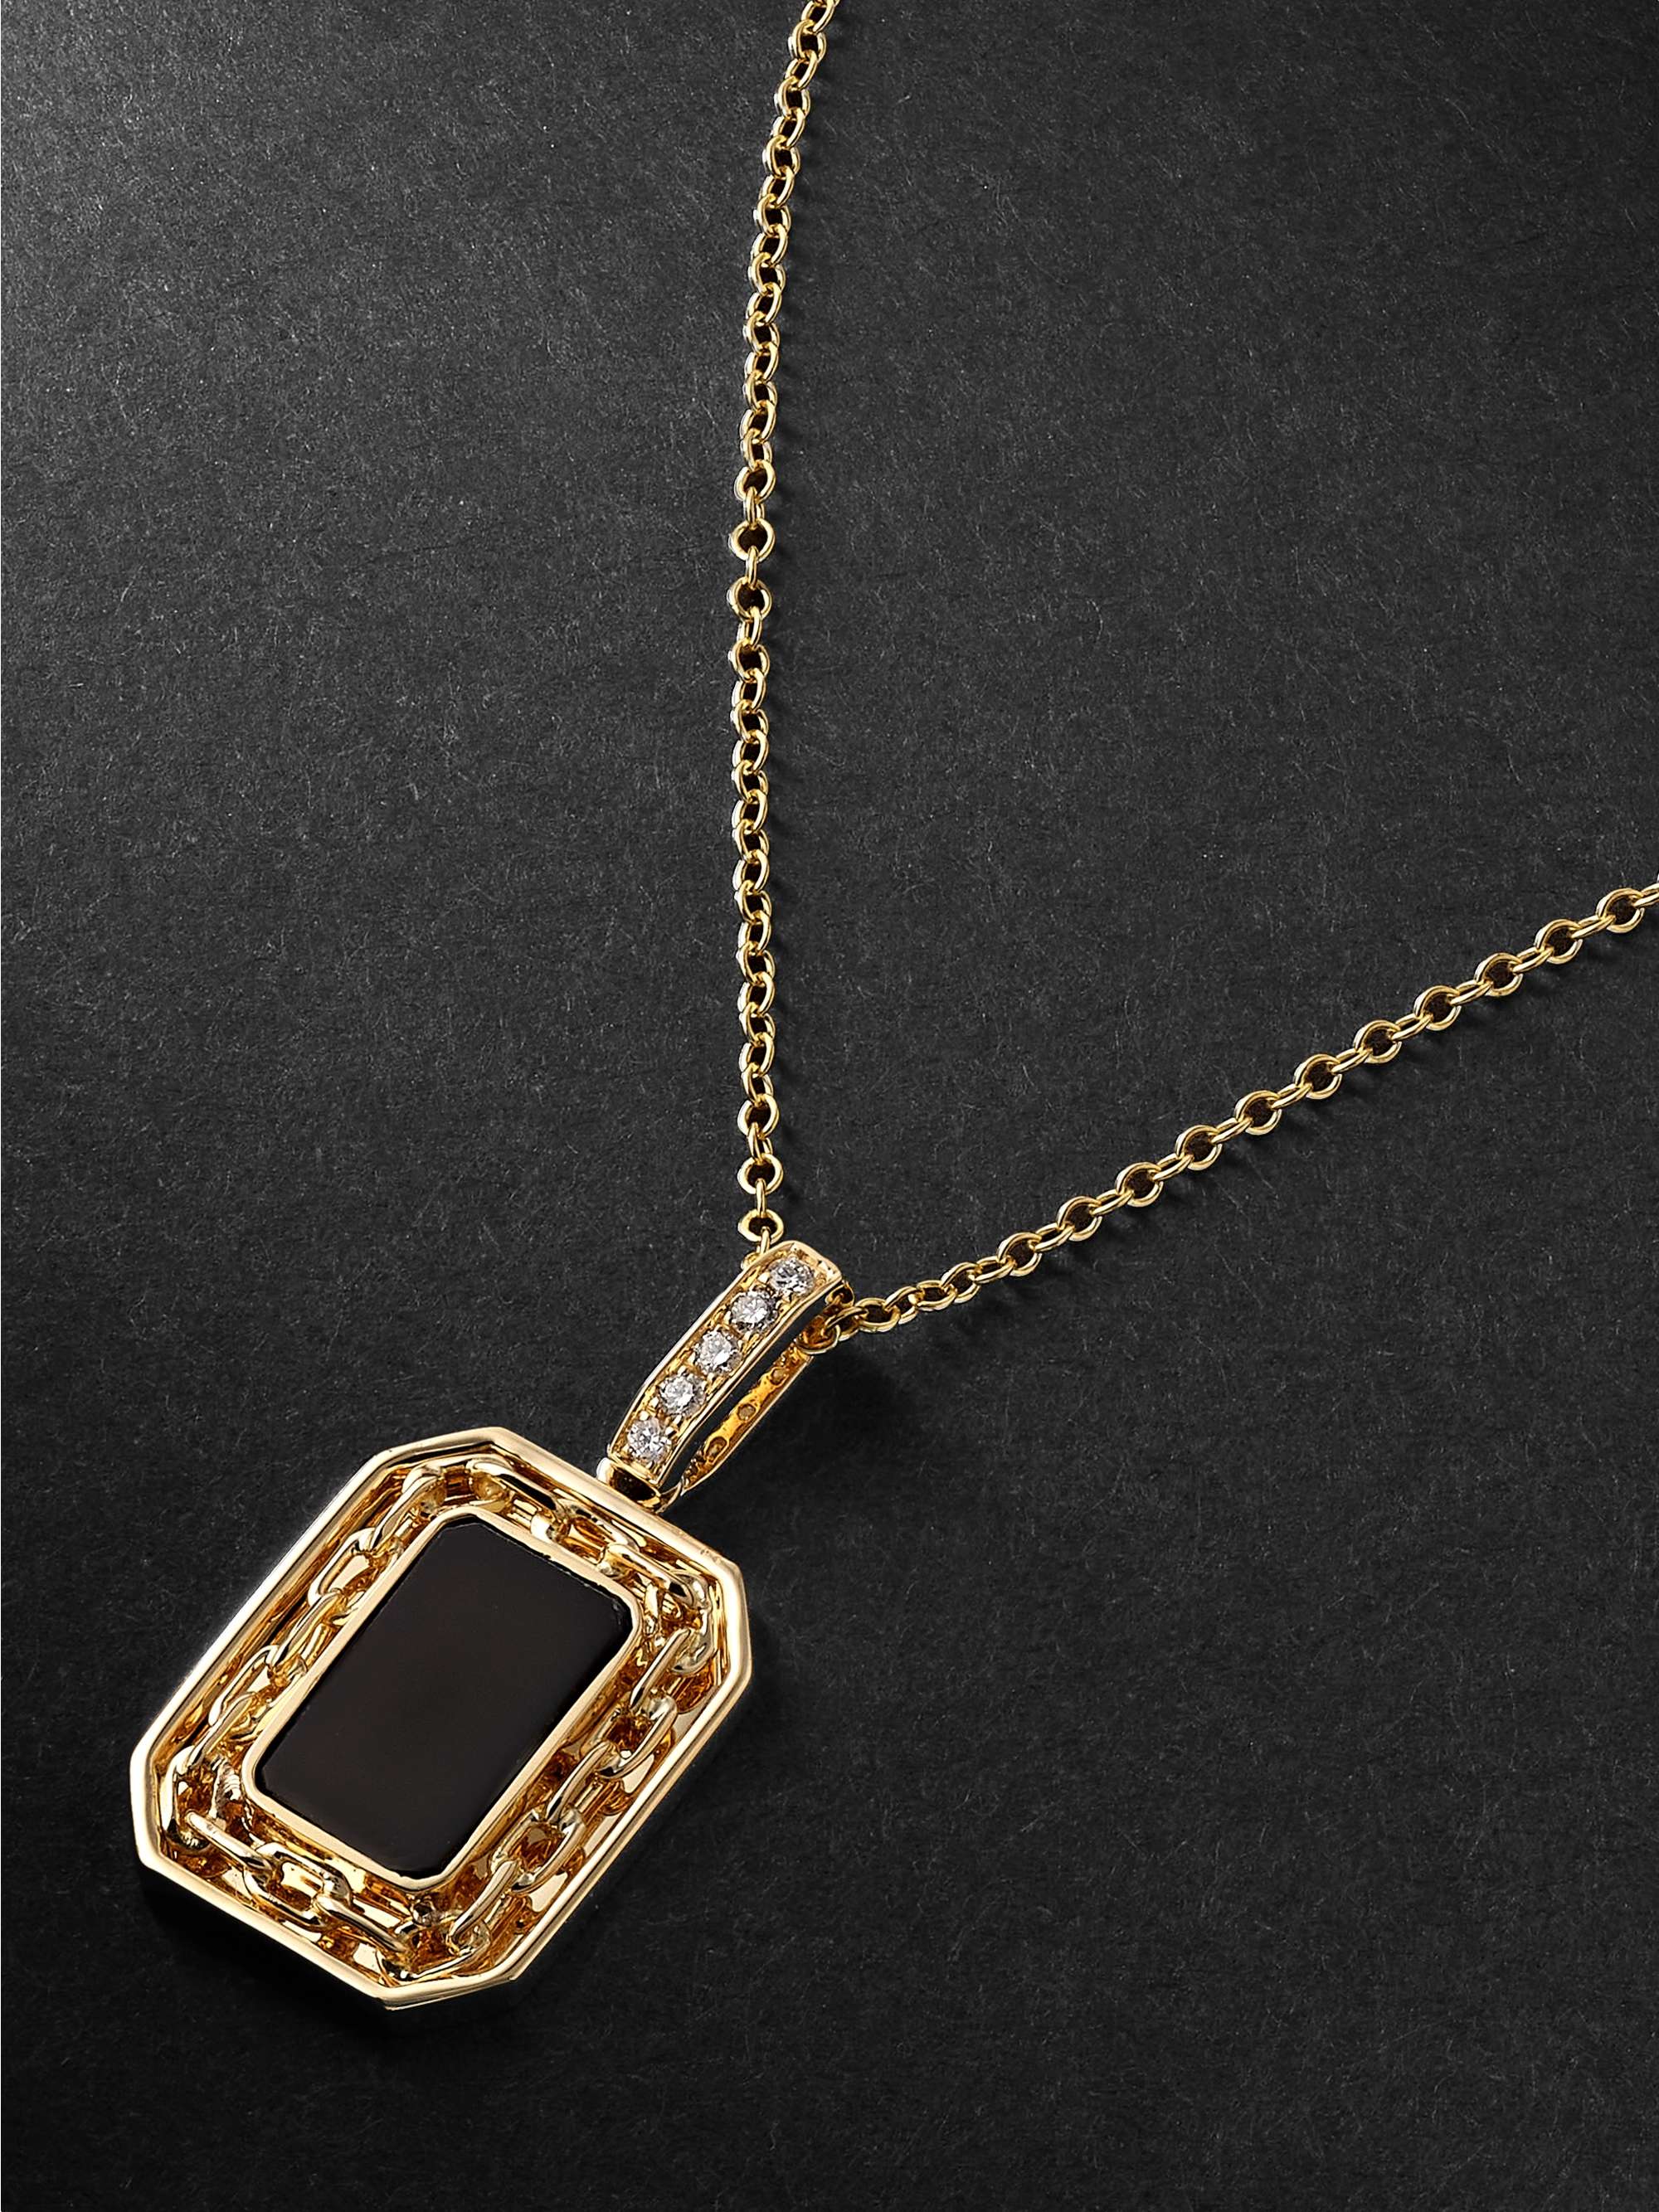 SHAY Gold, Diamond and Onyx Pendant Necklace